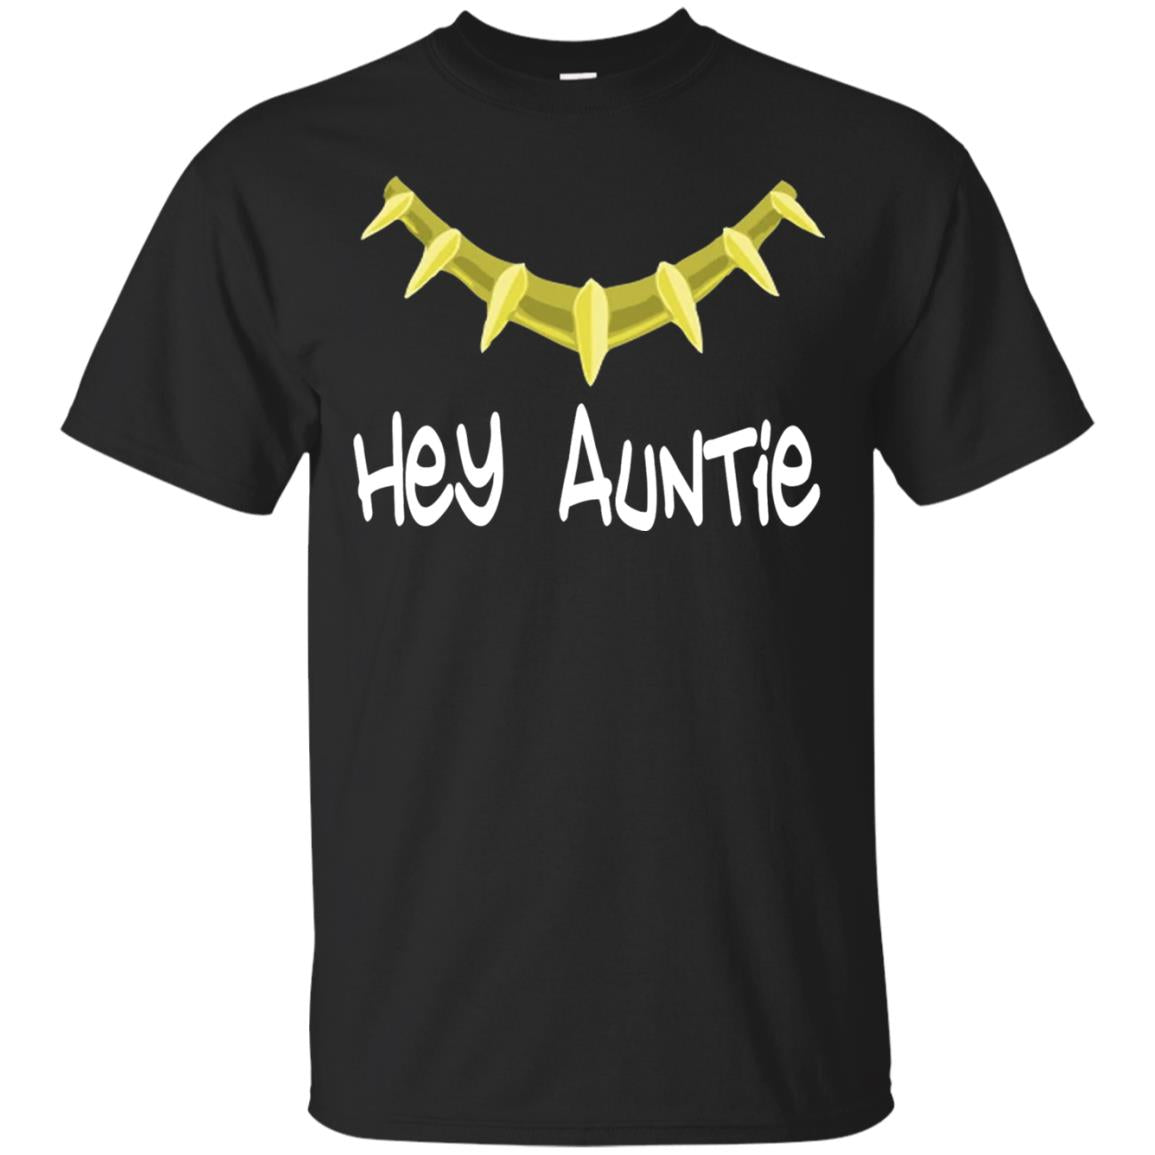 Hey Auntie Funny Aunt T-shirt